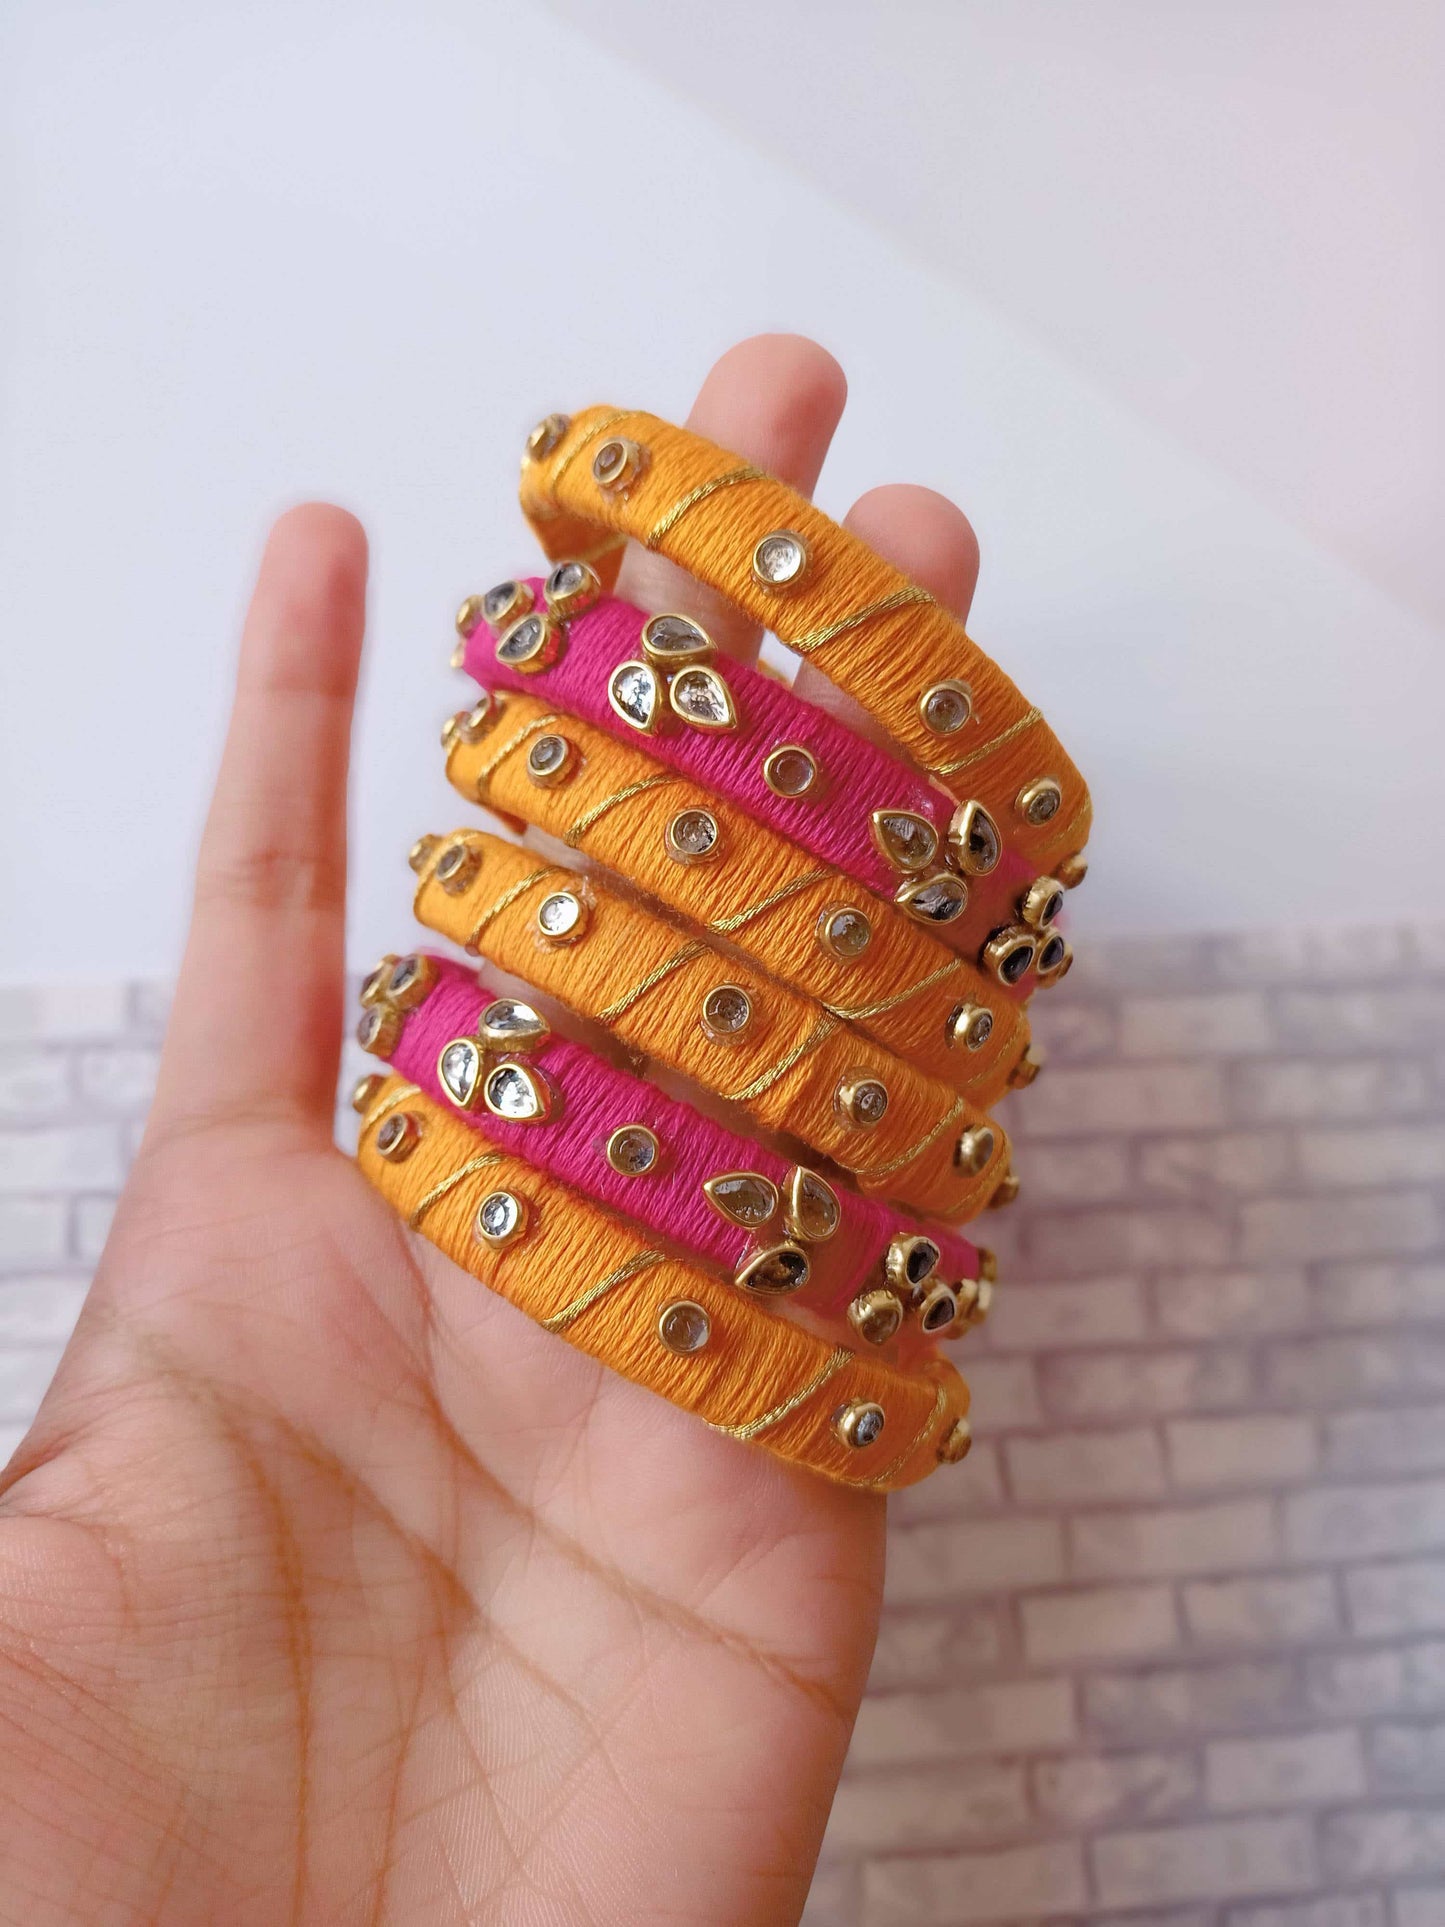 Palm holding pink and orange fabric bangles set with golden work on white backdrop